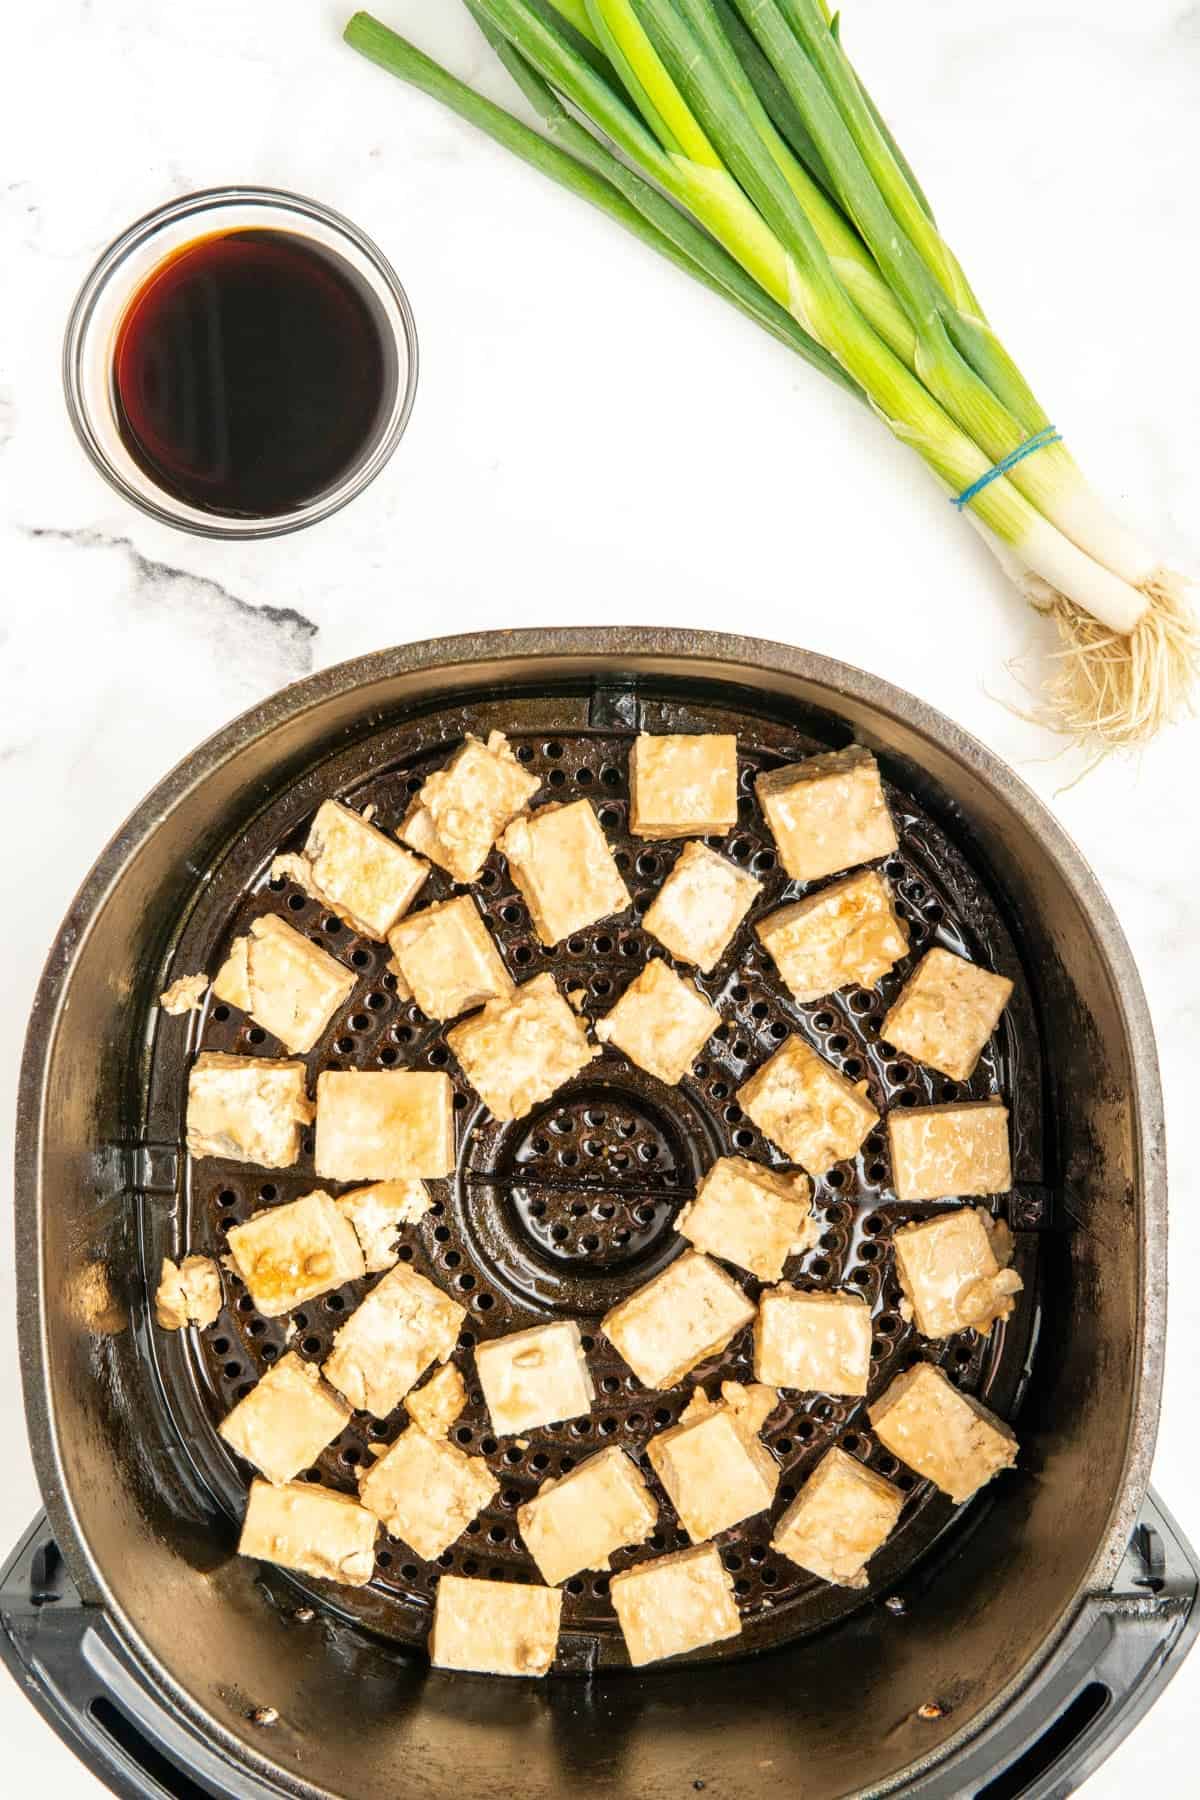 Uncooked tofu in an air fryer basket.